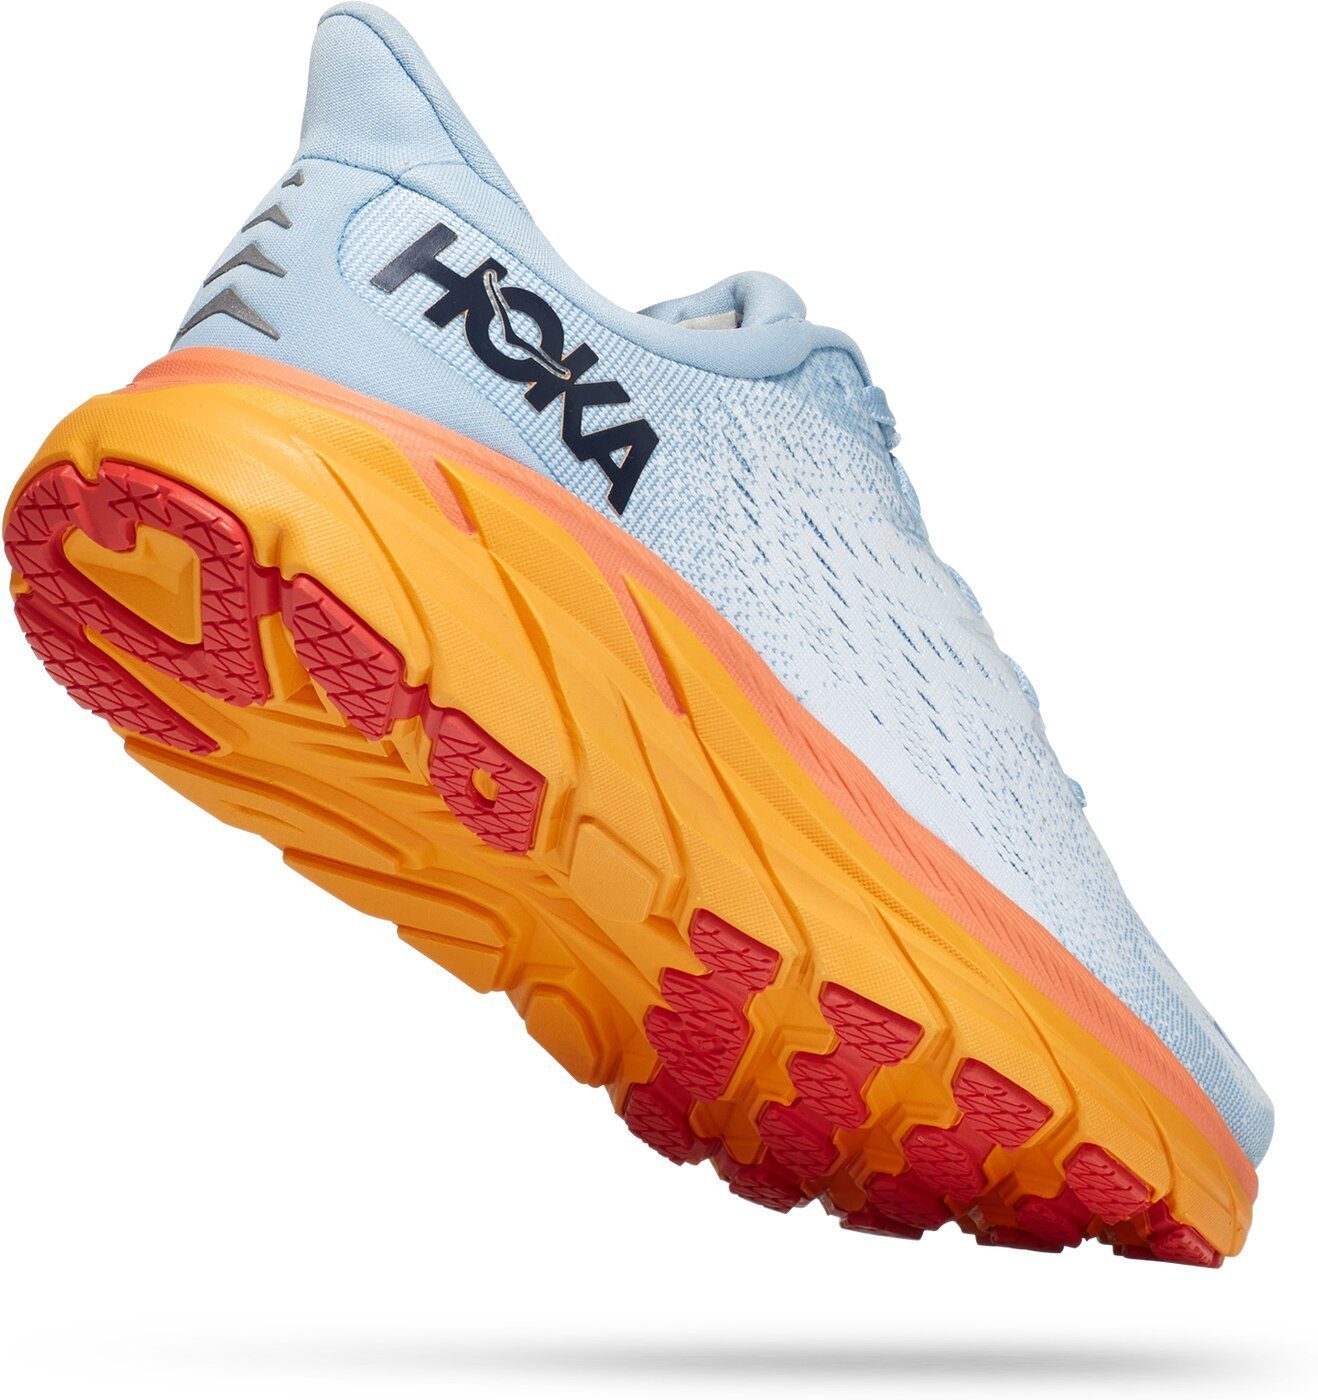 SONG SUMMER W One CLIFTON ICE Hoka 8 FLOW / One Laufschuh